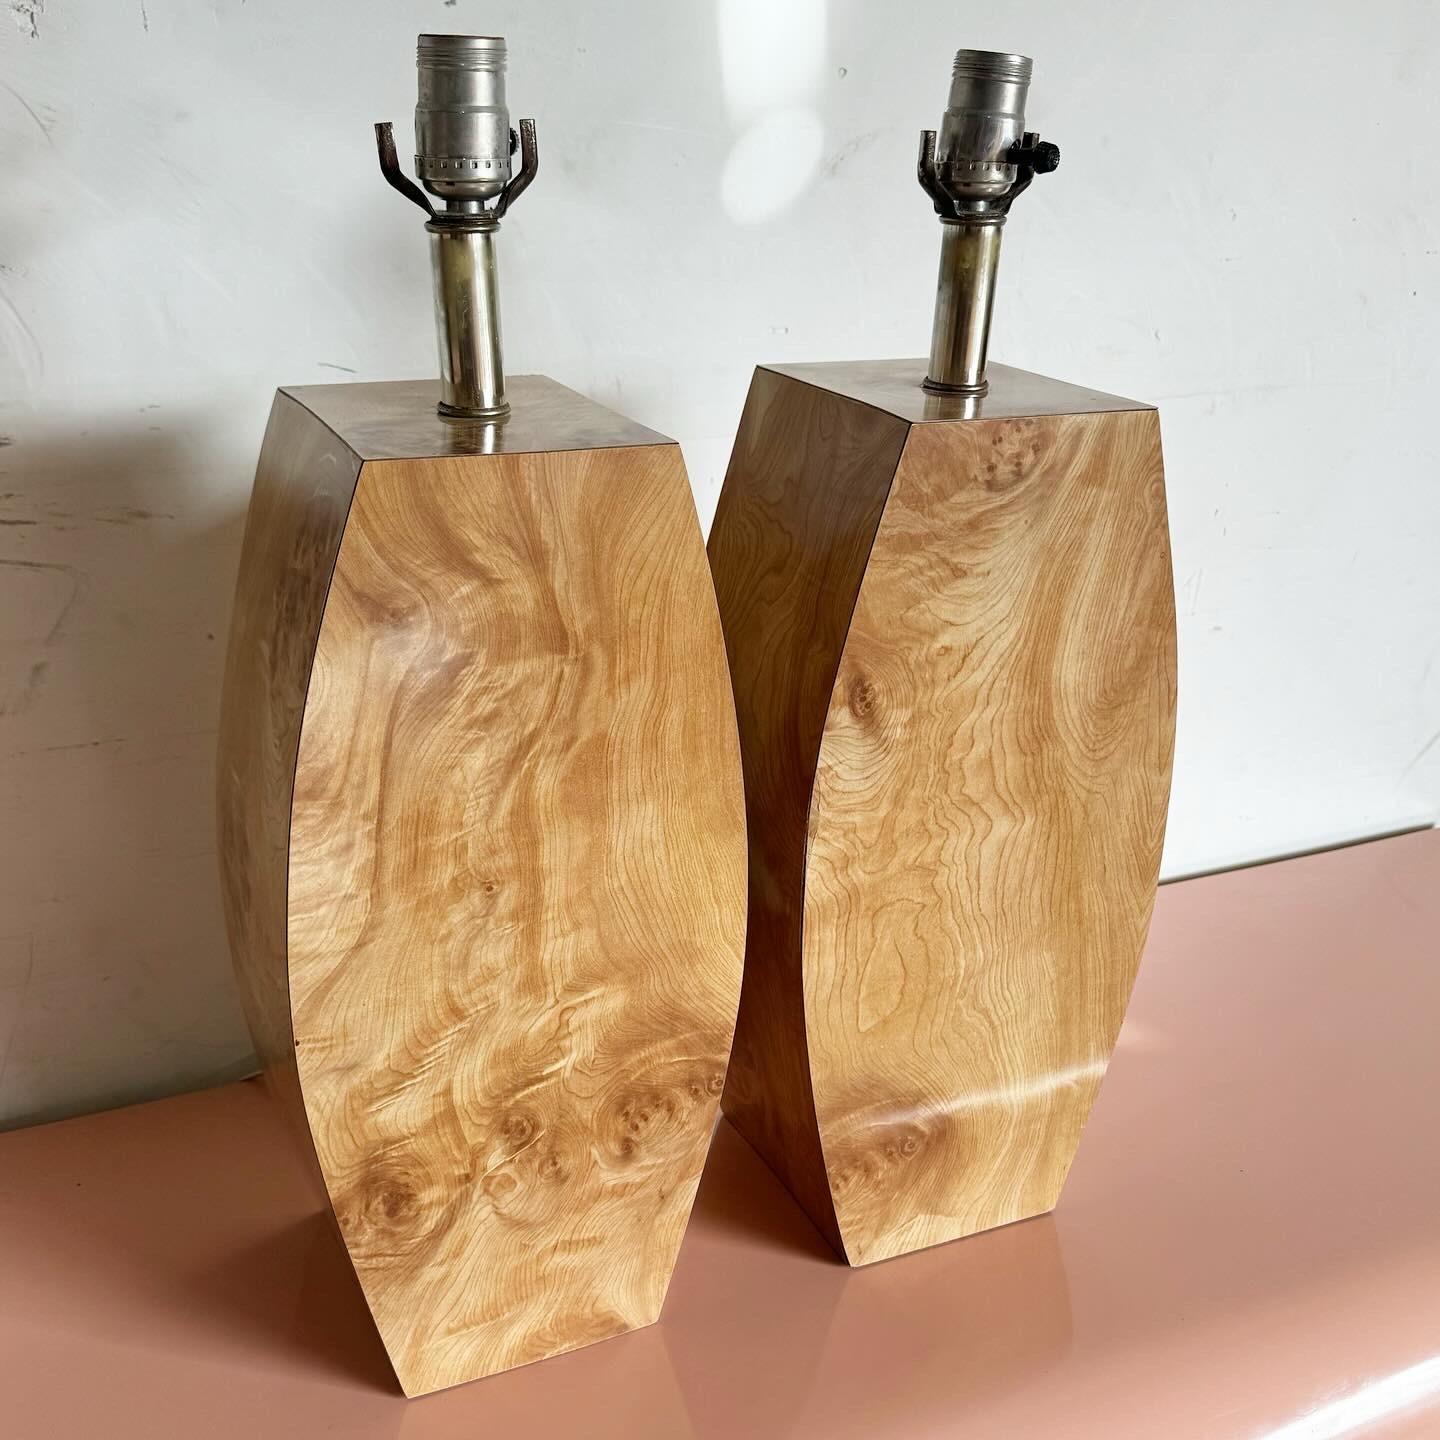 Elevate your decor with this pair of Postmodern Burl Wood Laminate Table Lamps, blending the unique beauty of burl wood with a contemporary design. Perfect for adding warmth and a modern touch to any space, these lamps serve as both ambient lighting